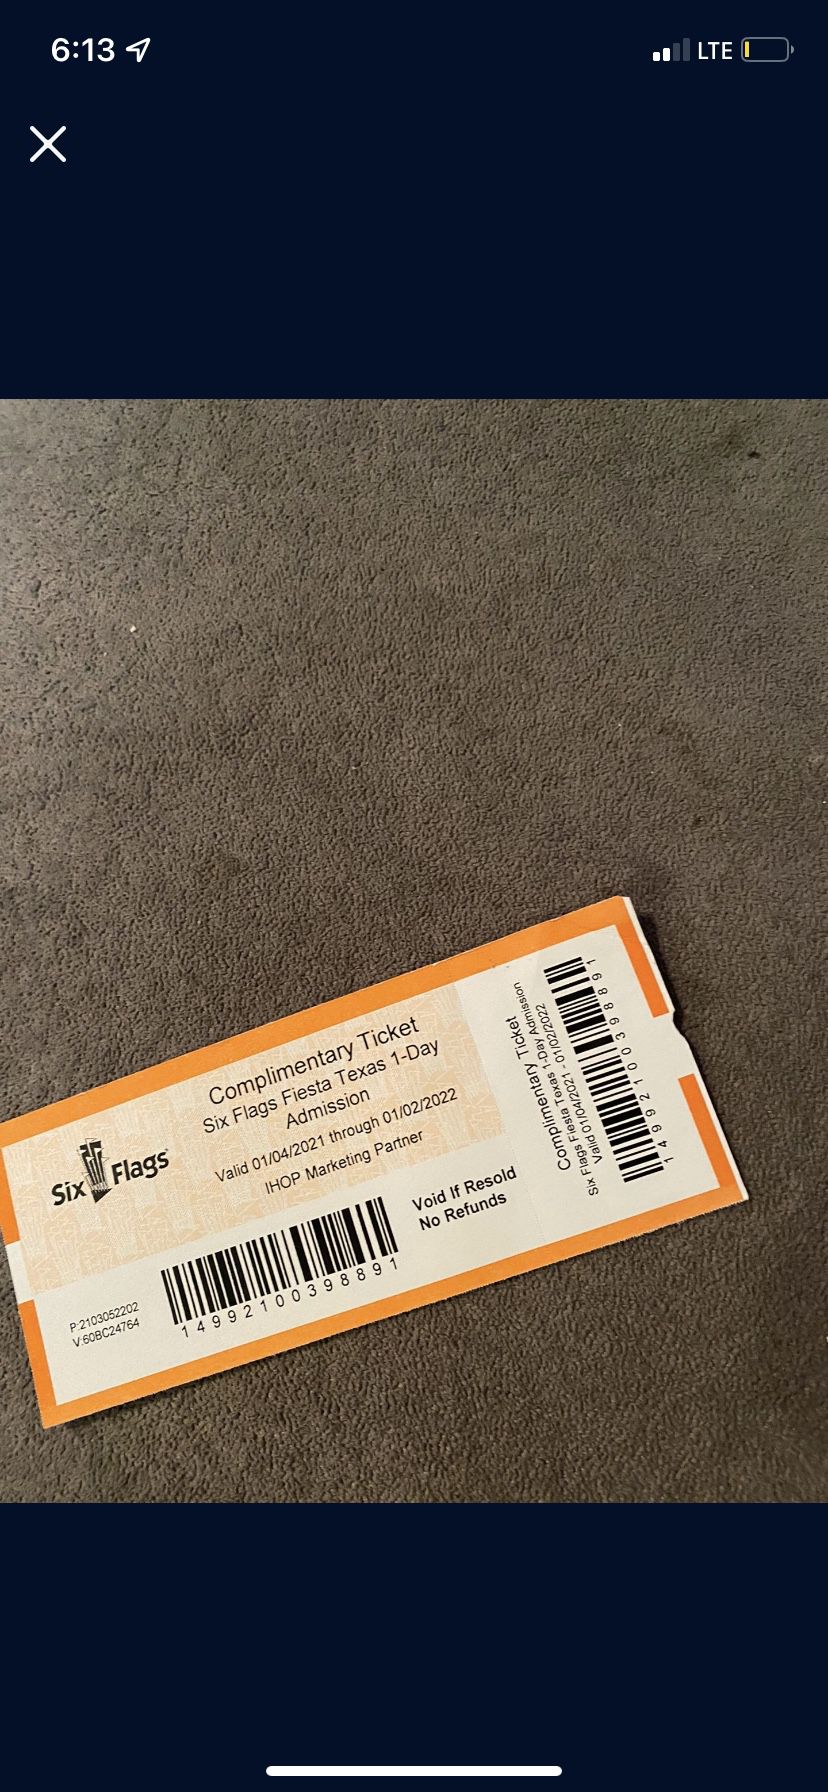 Six Flags Ticket (just 1)